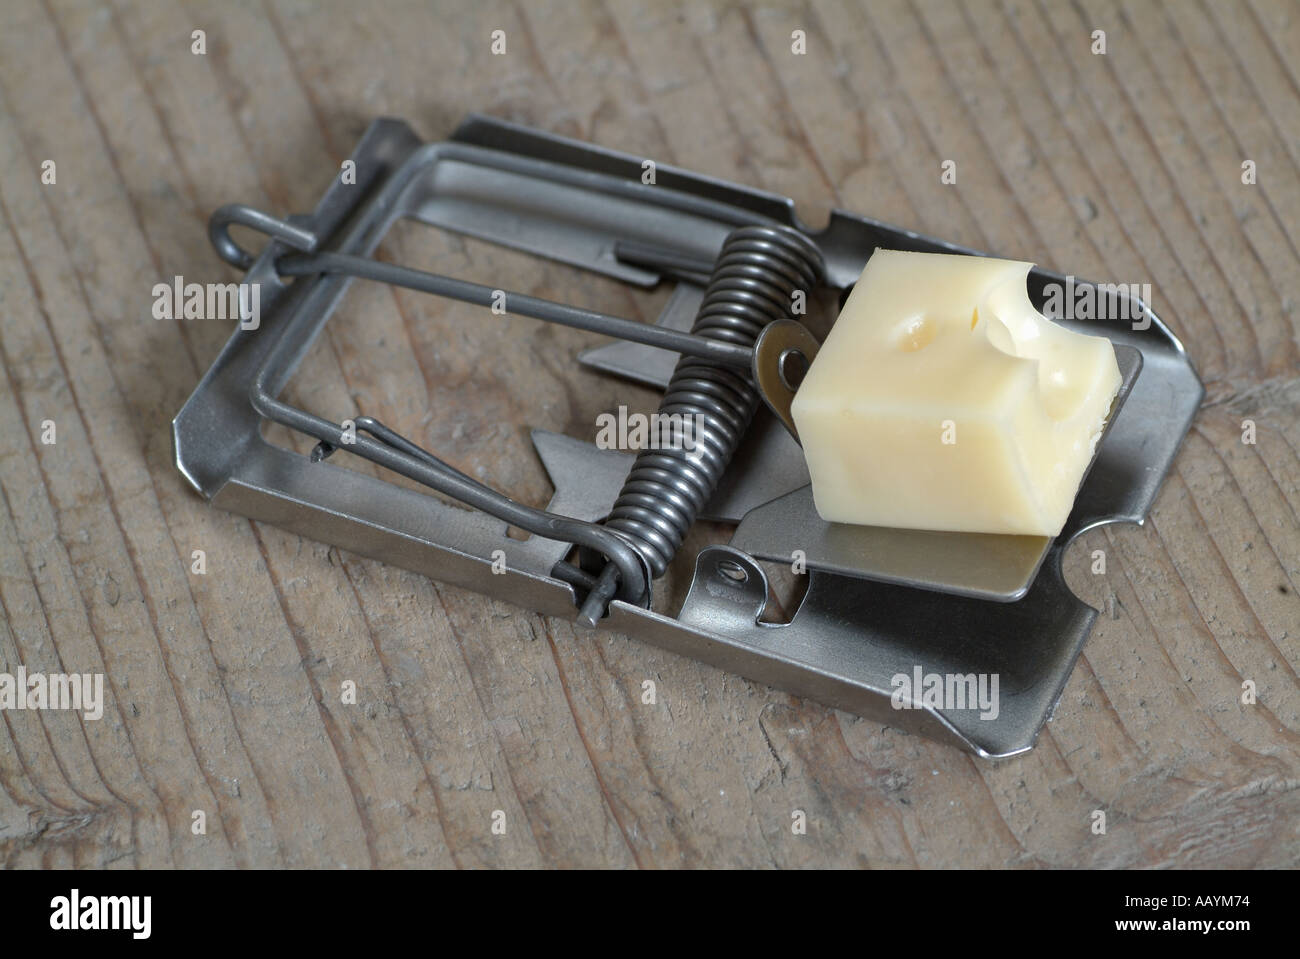 Mouse Trap Baited with Cheese Stock Photo